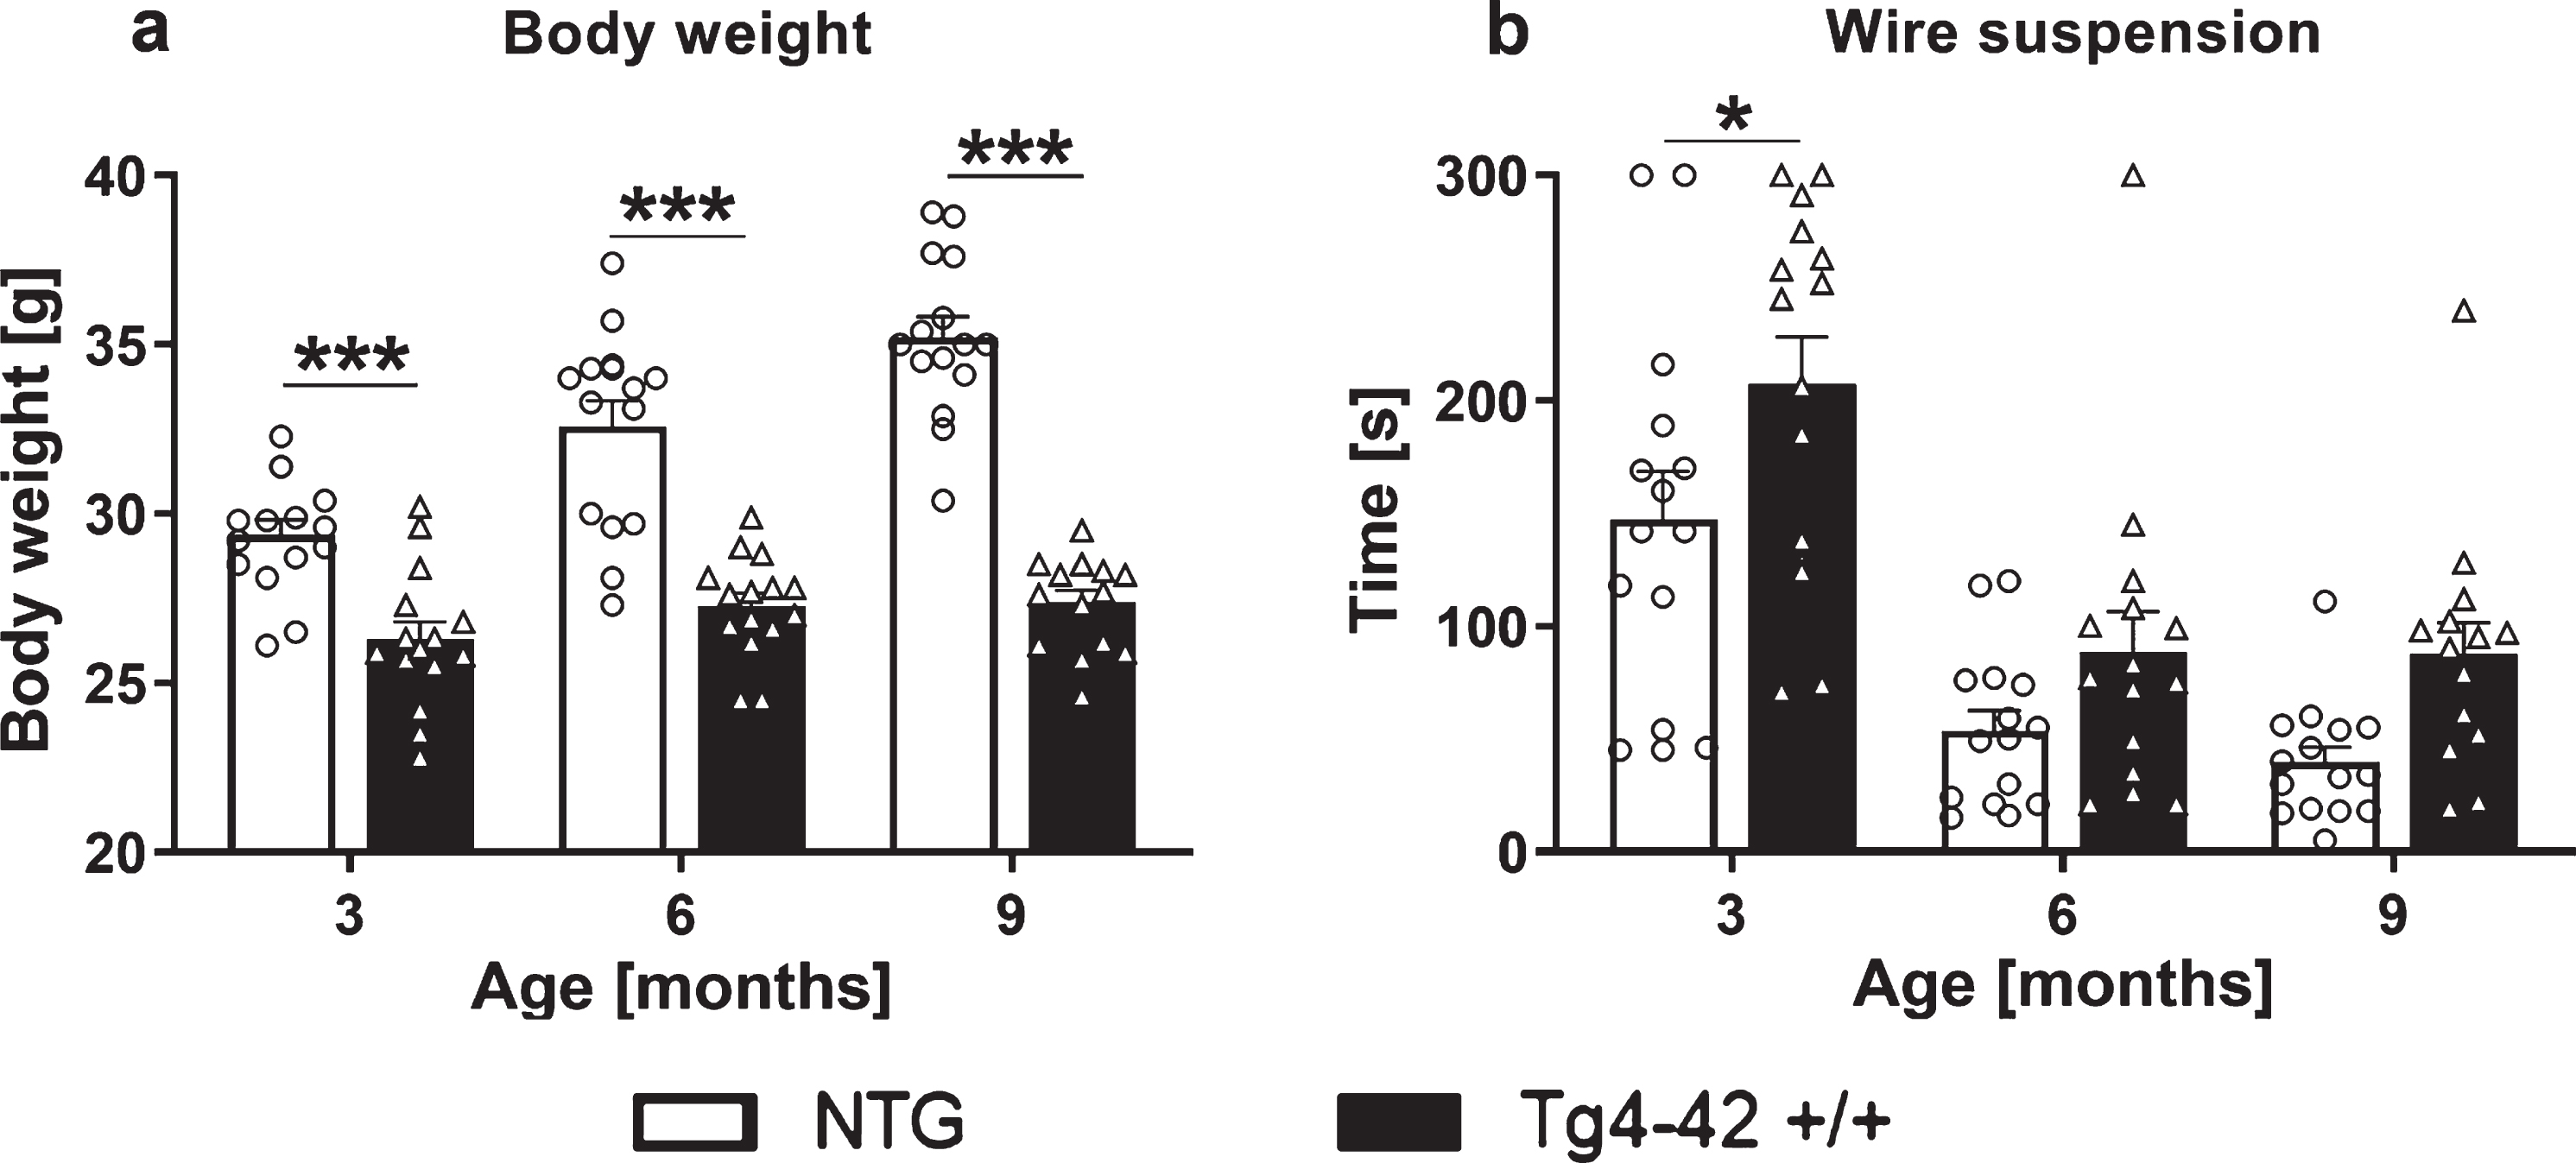 Body weight and wire suspension time in 3-, 6-, and 9-month-old Tg4-42 +/+ mice. Body weight in gram (a) and time in seconds animals were able to hold the grid (b). a, b) Two-way ANOVA followed by Bonferroni’s post hoc test. n = 15 per group. Mean + SEM. *p < 0.05, ***p < 0.001.